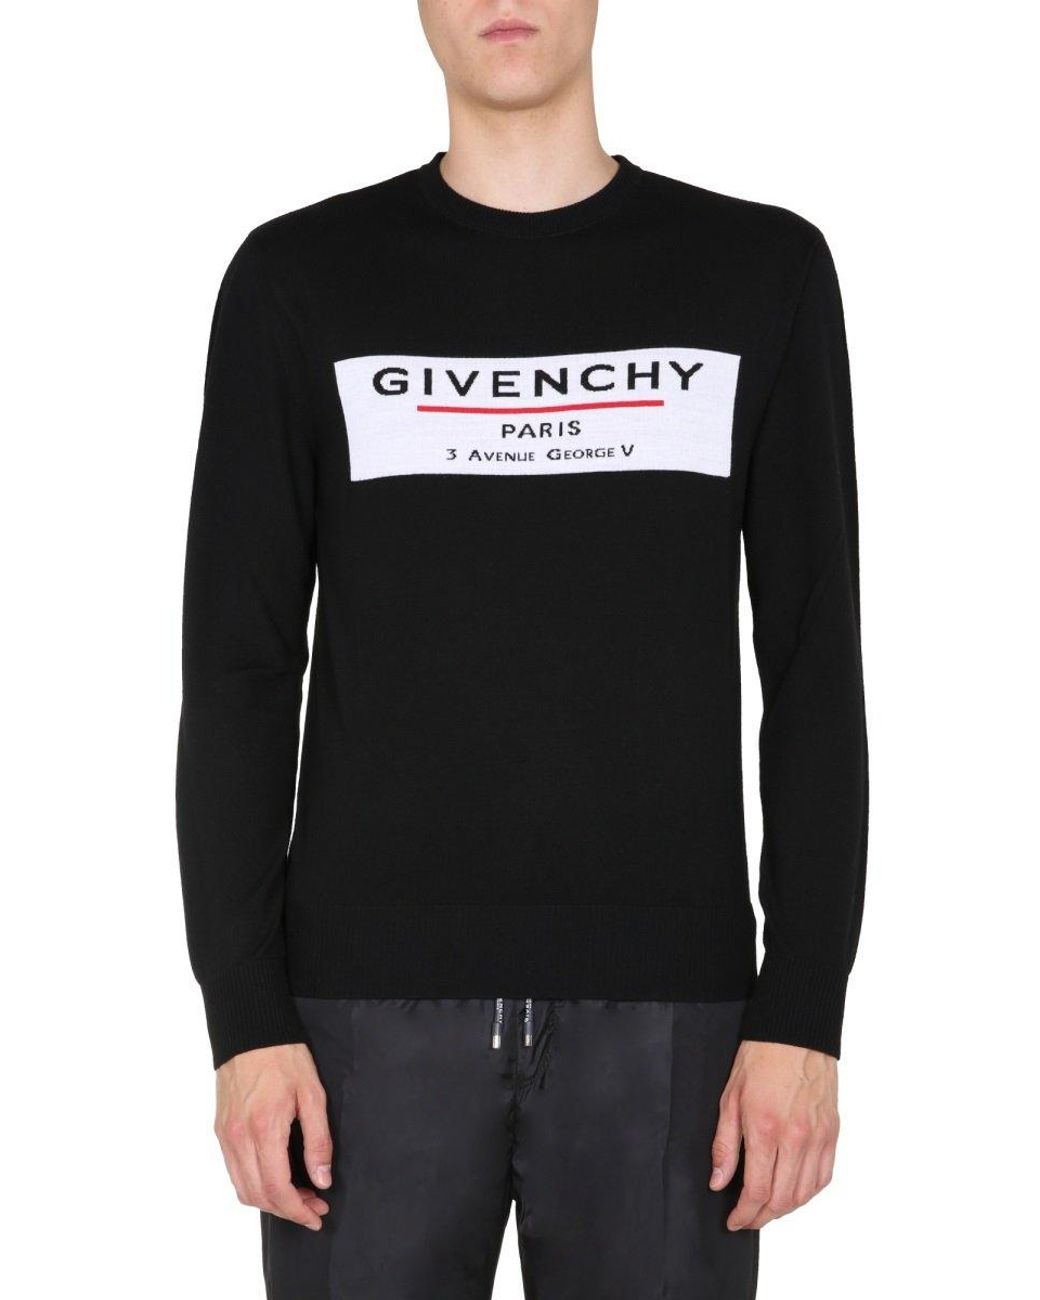 Givenchy Crew Neck Sweater in Black for Men - Lyst